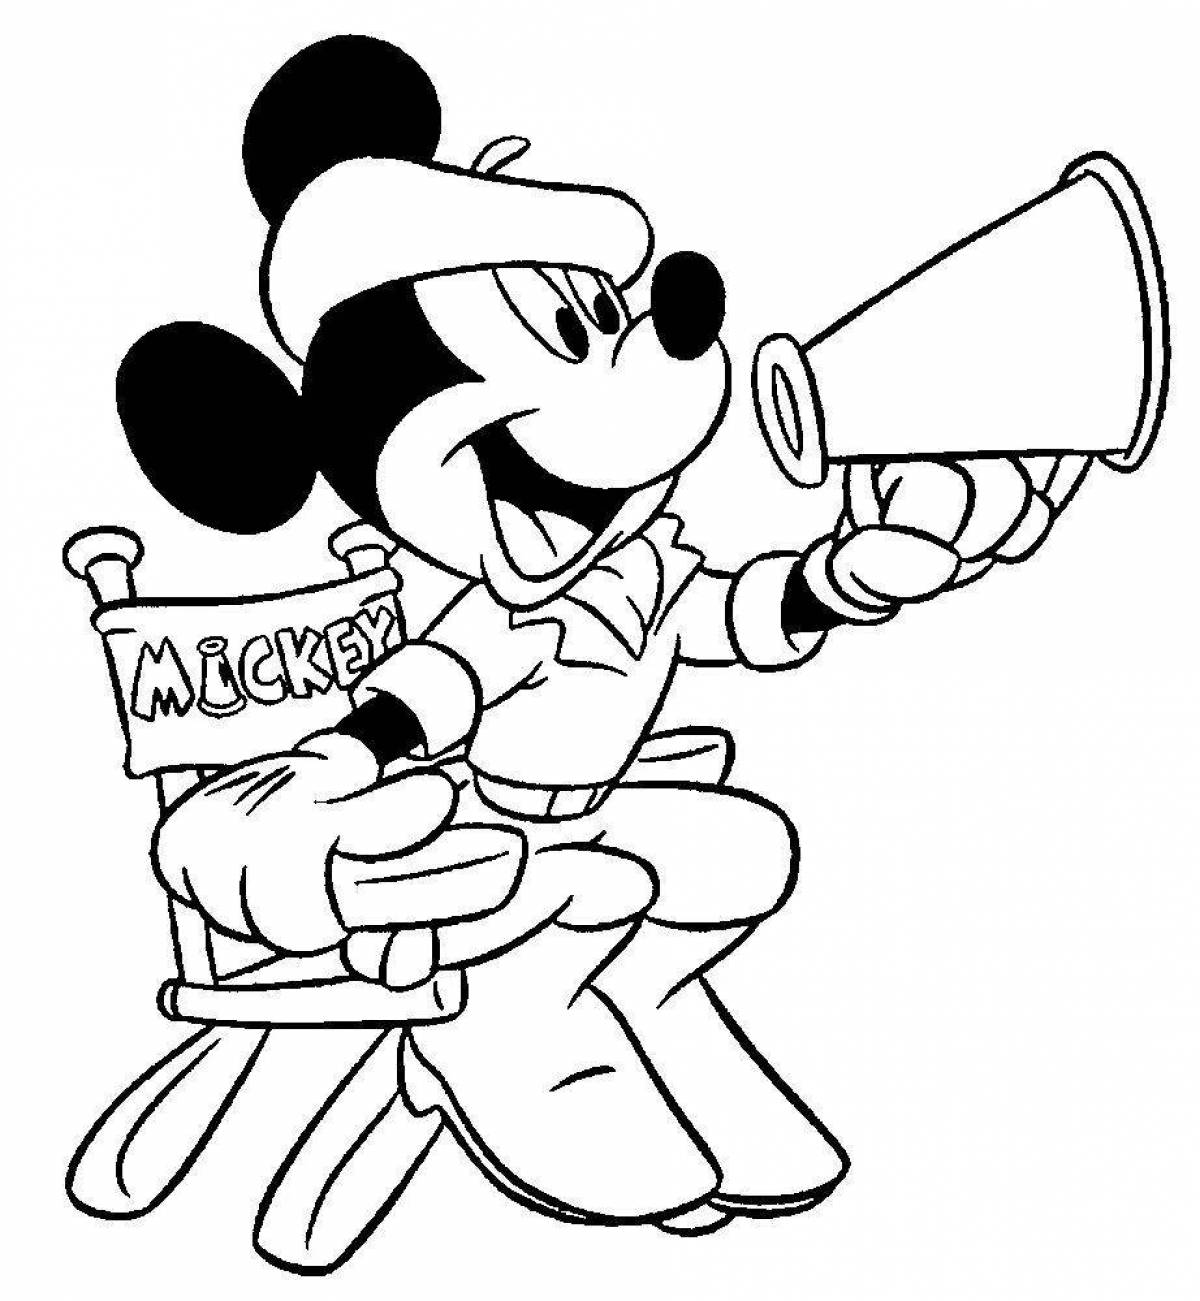 Coloring games about mickey